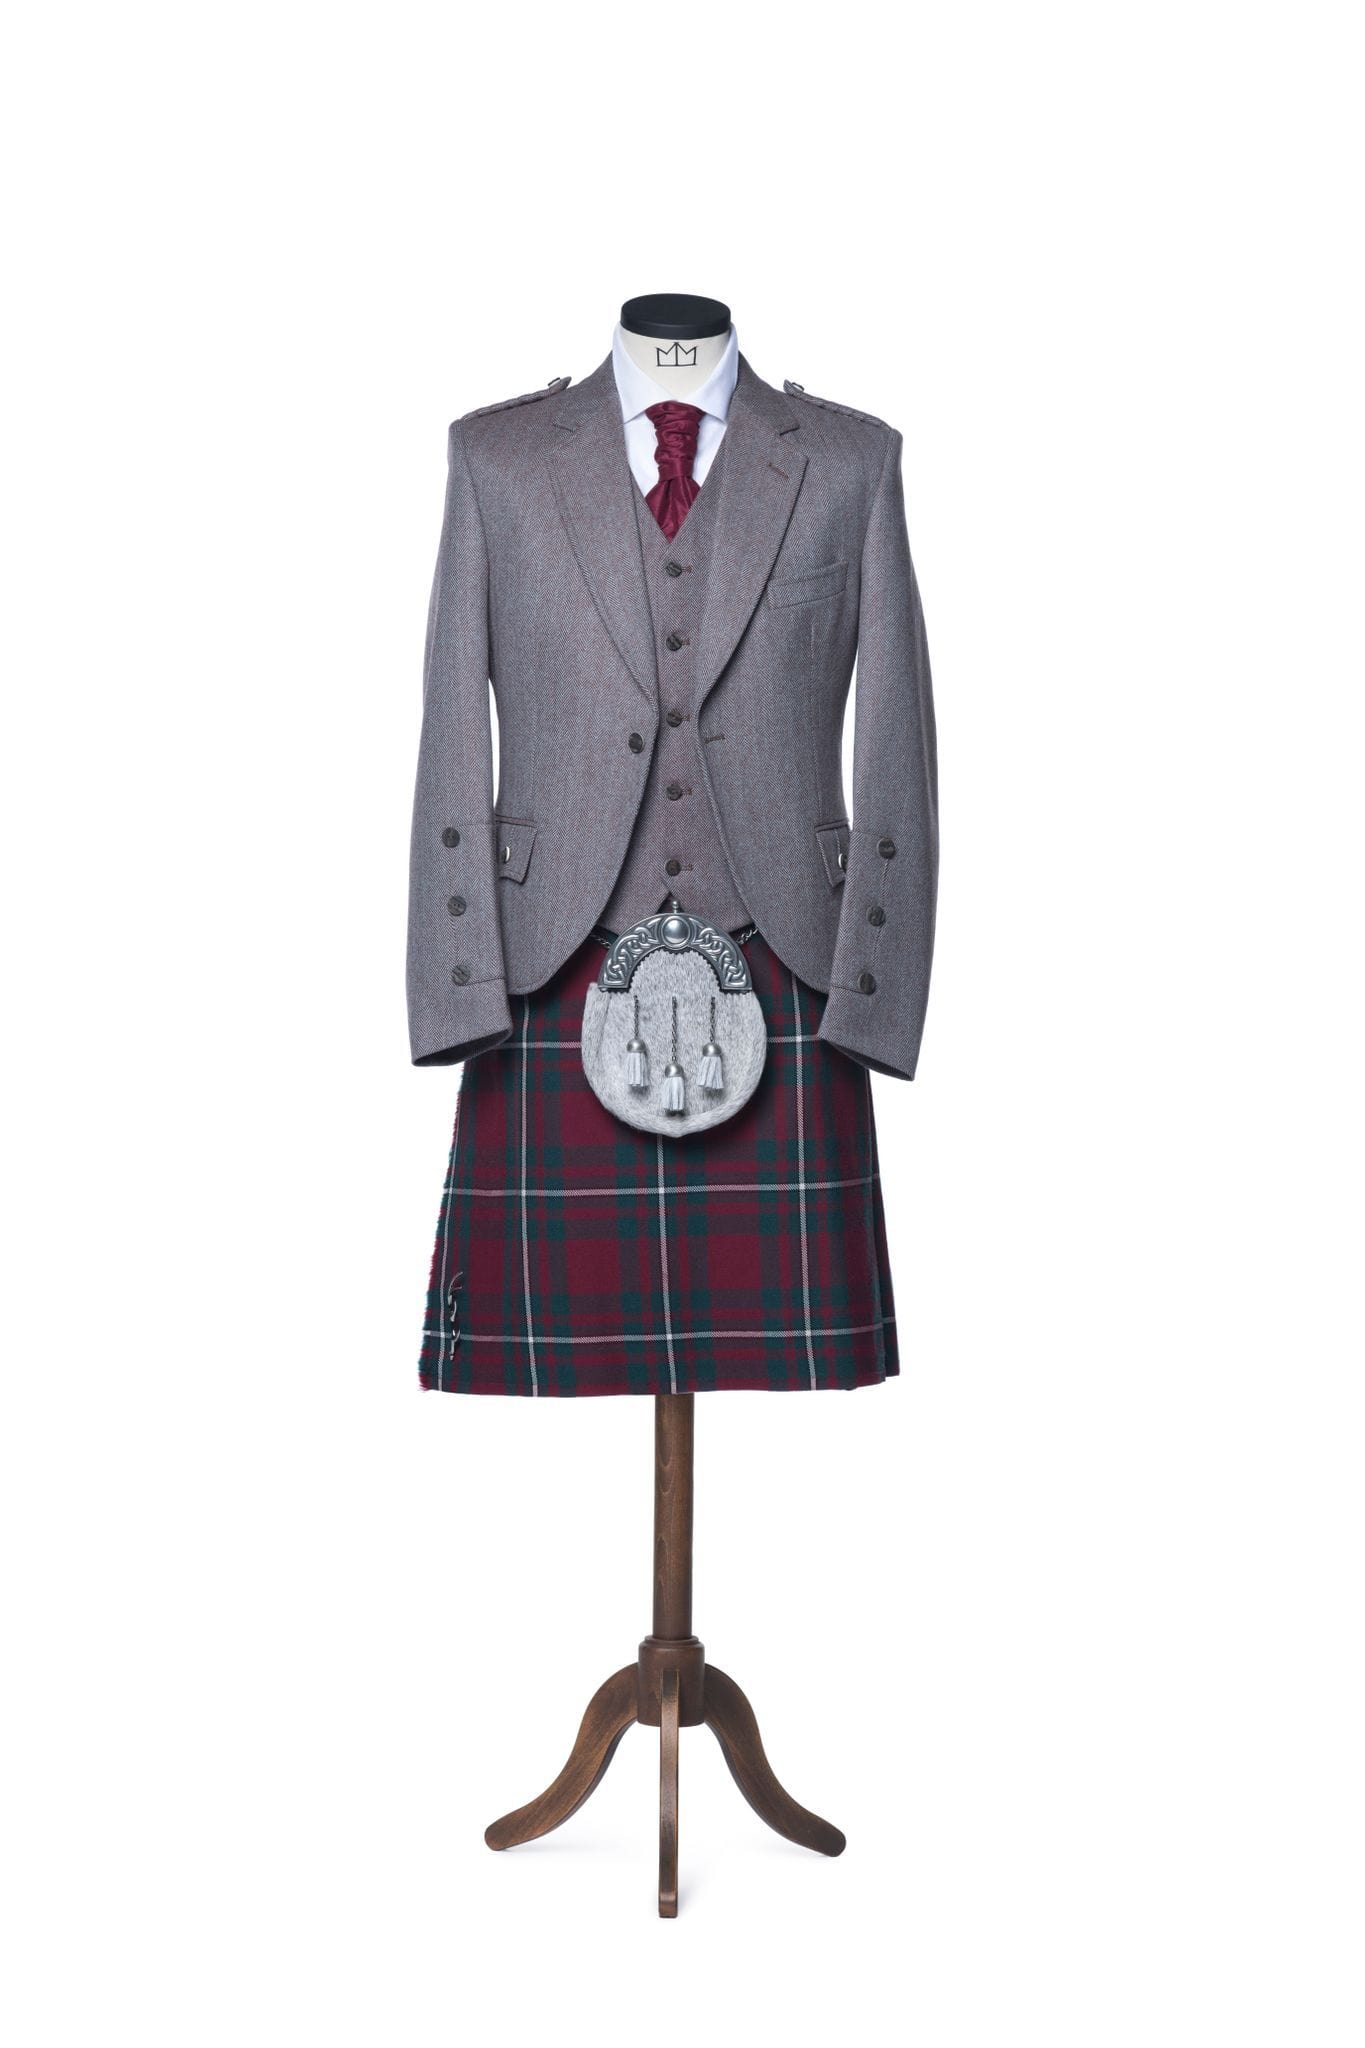 Russet Red Tweed Kilt Outfit - MacGregor and MacDuff